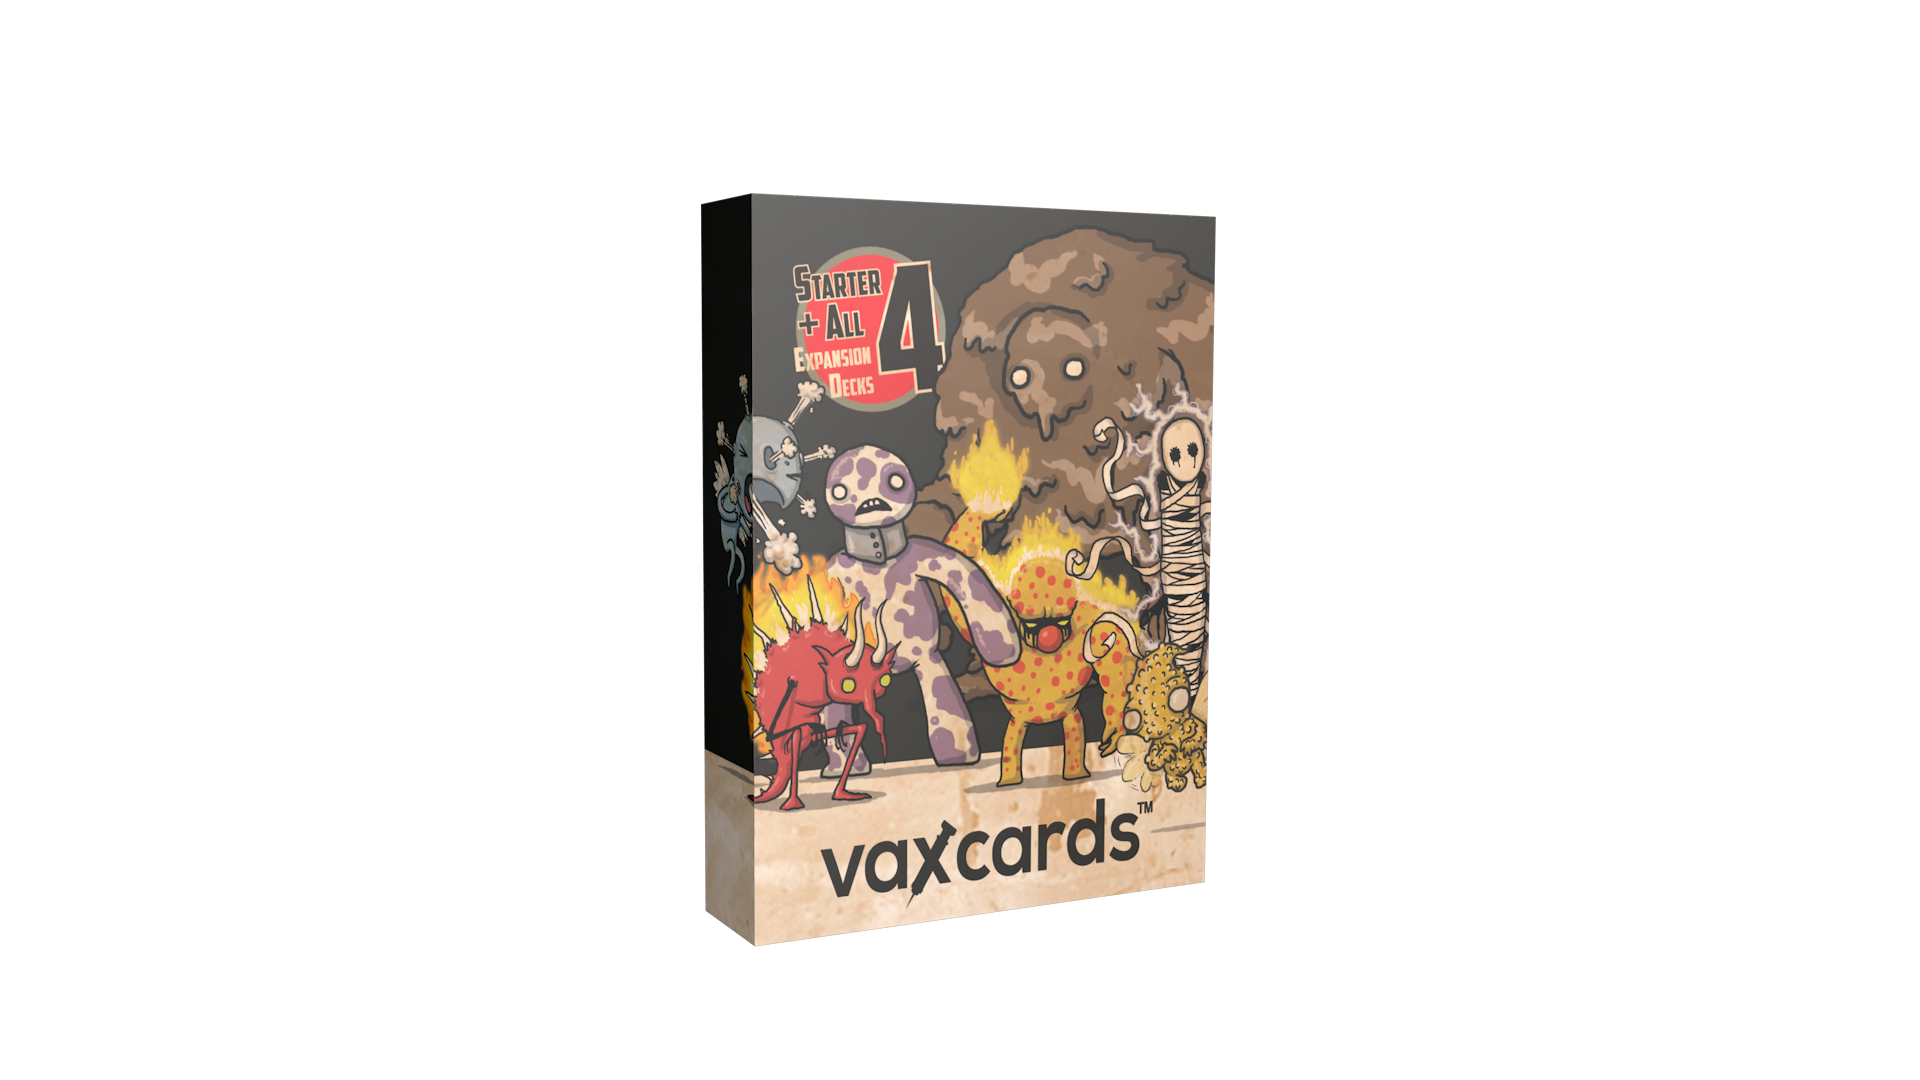 complete Edition BRAND NEW Vaxcards Pandemic Box Set 